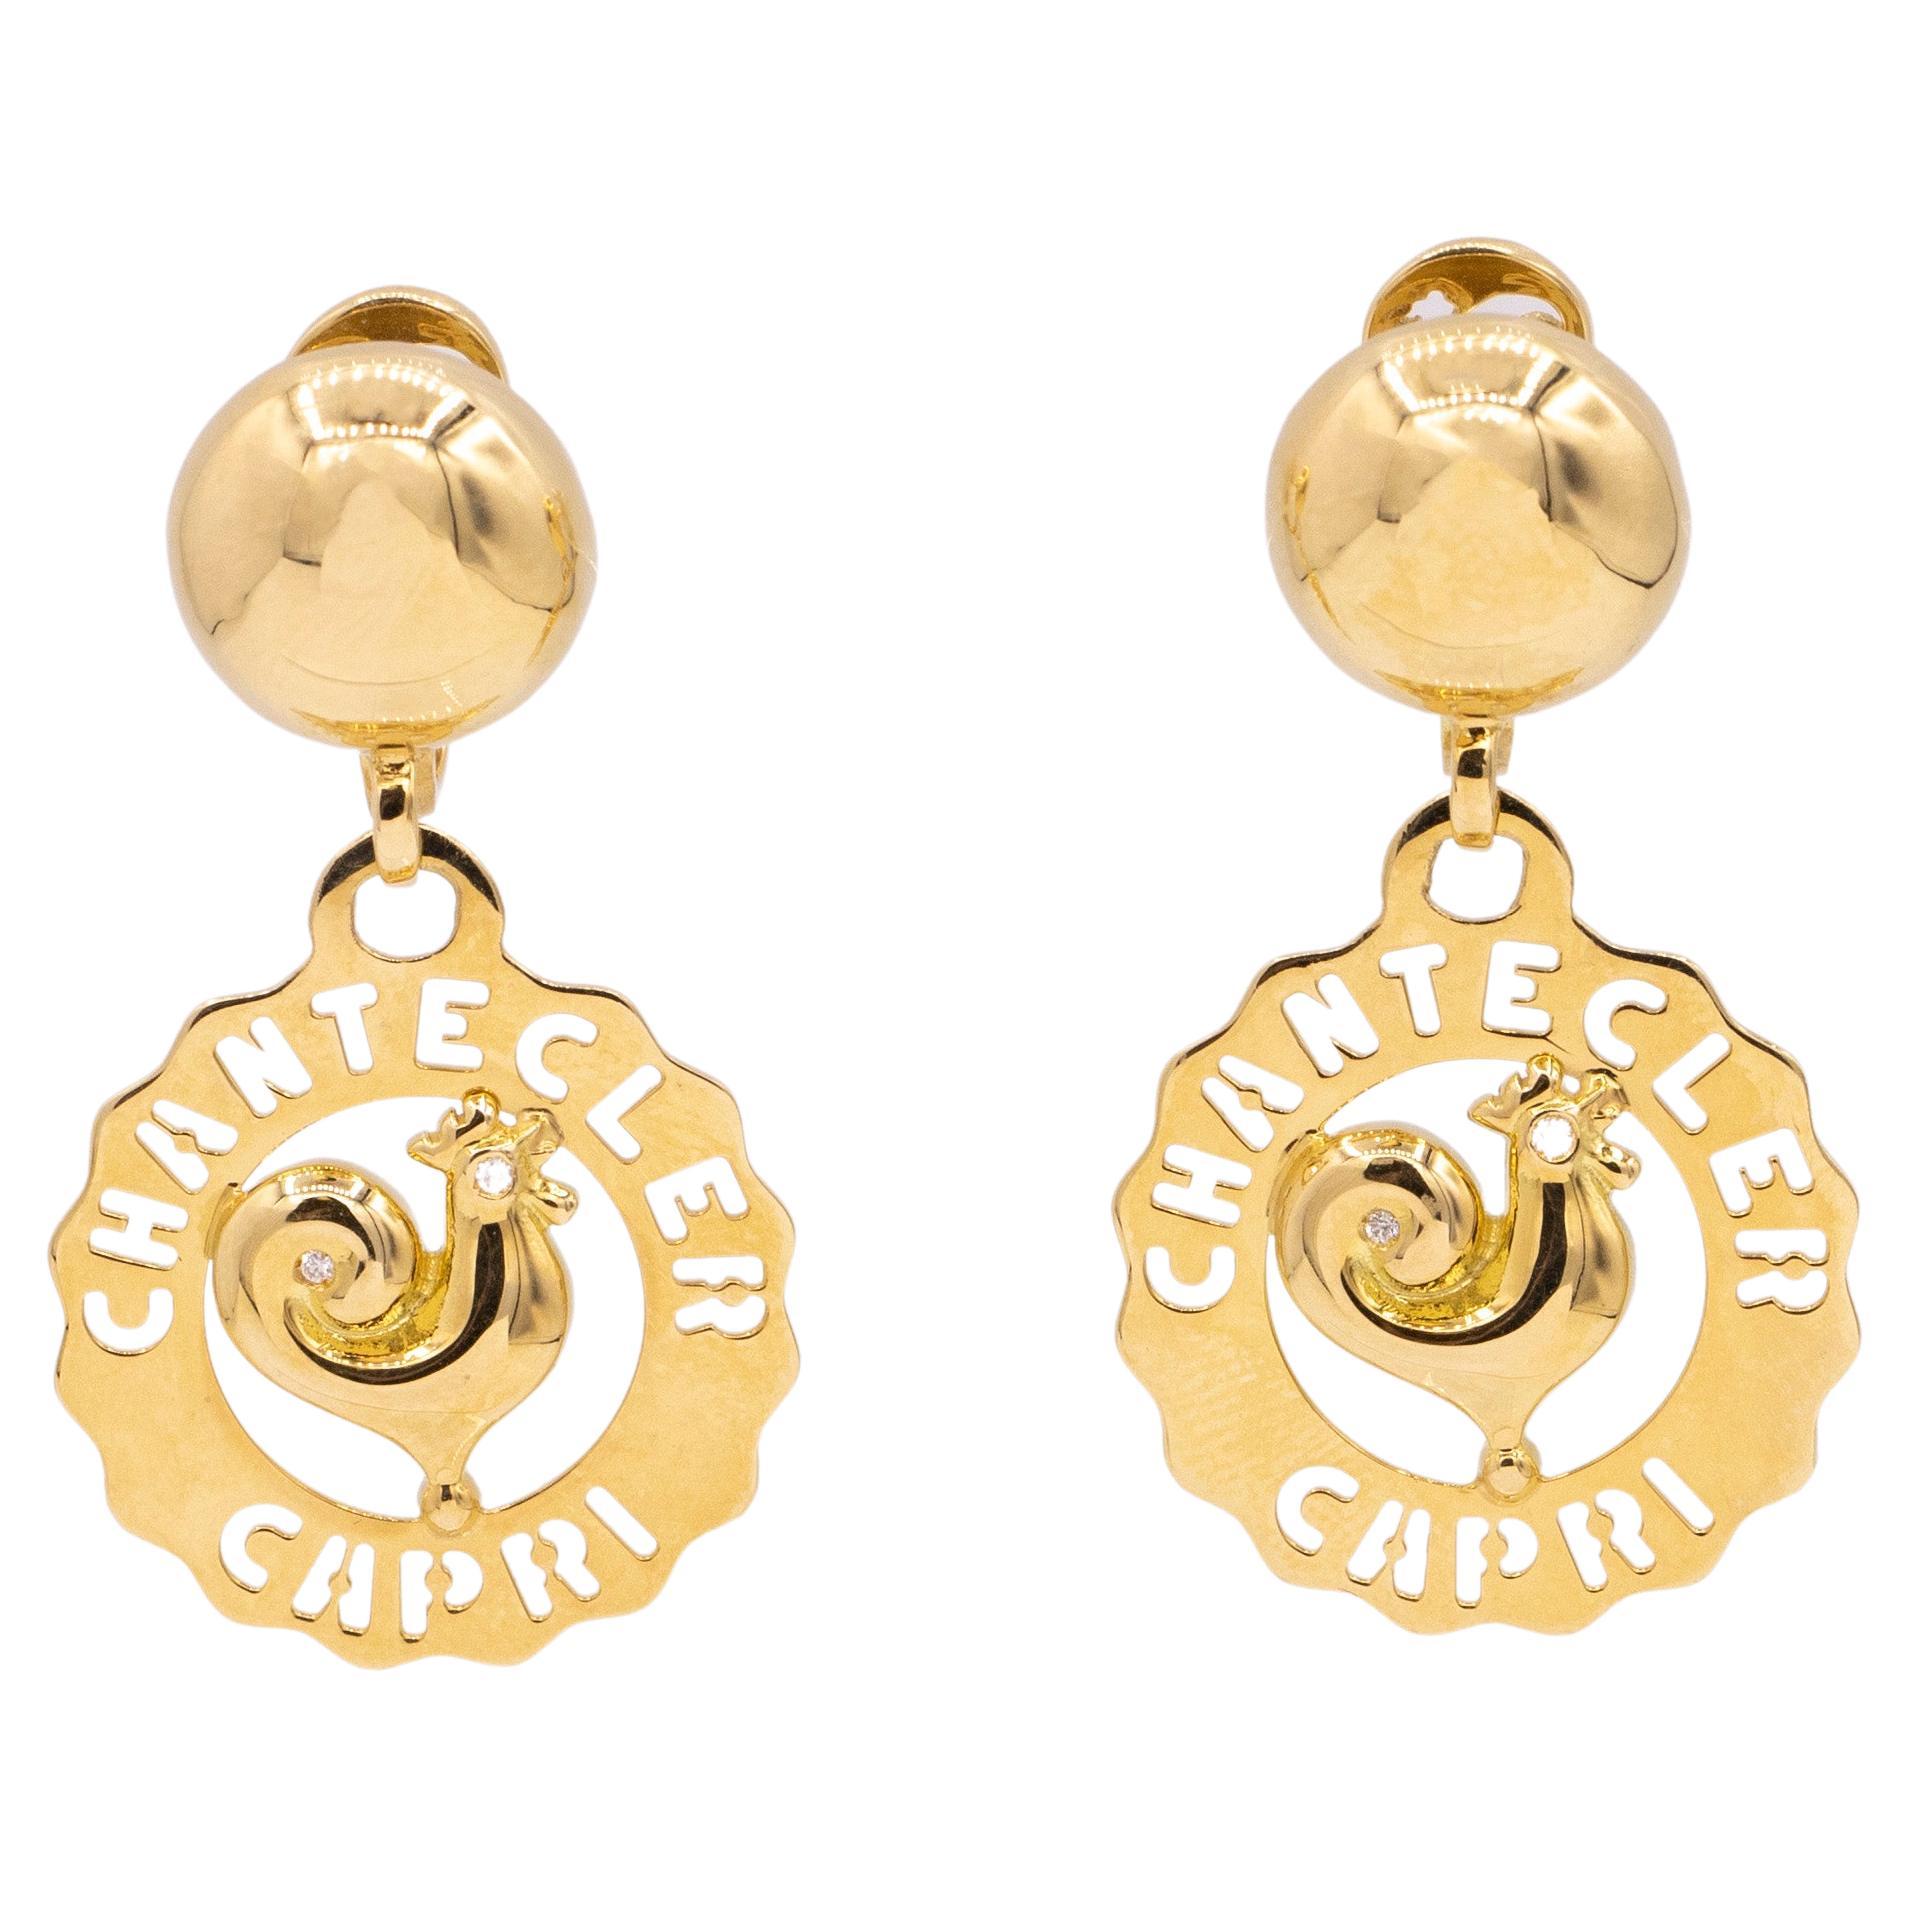 Chantecler Logo Rooster Earrings, Exclusively at Hamilton Jewelers